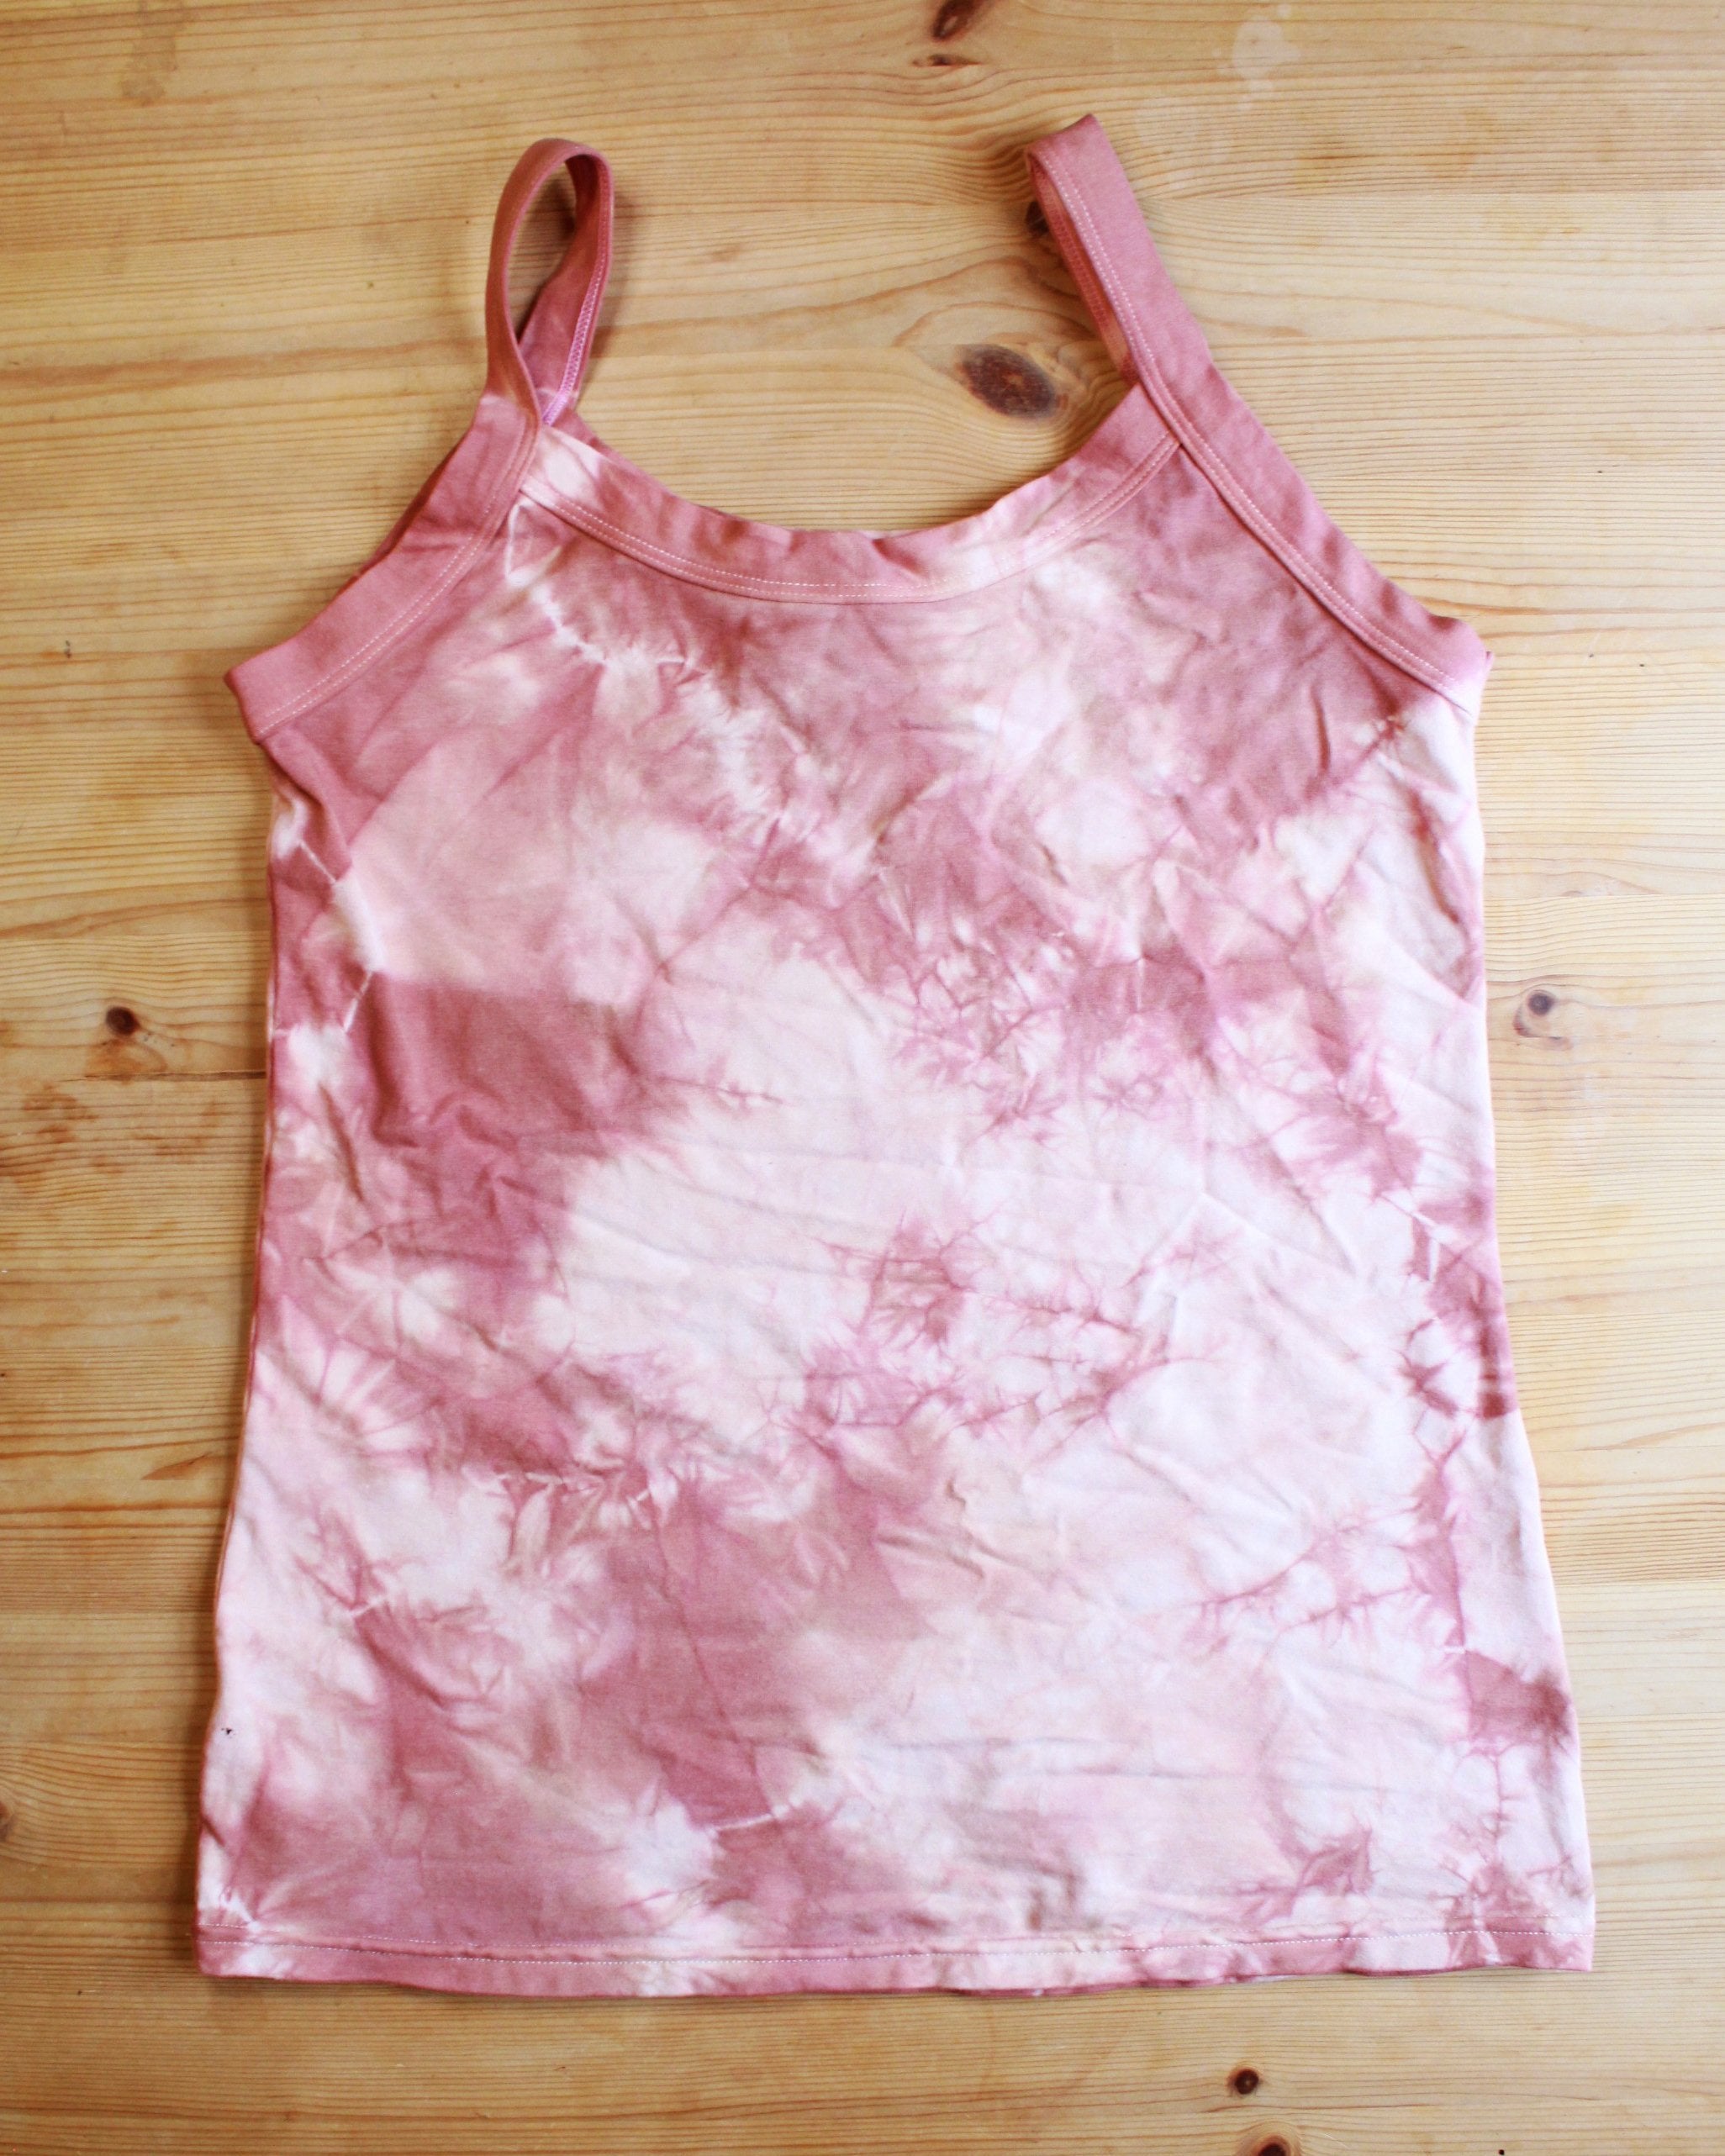 Back flat-lay of Thunderpants organic cotton Camisole in limited edition hand dyed pink tie dye.